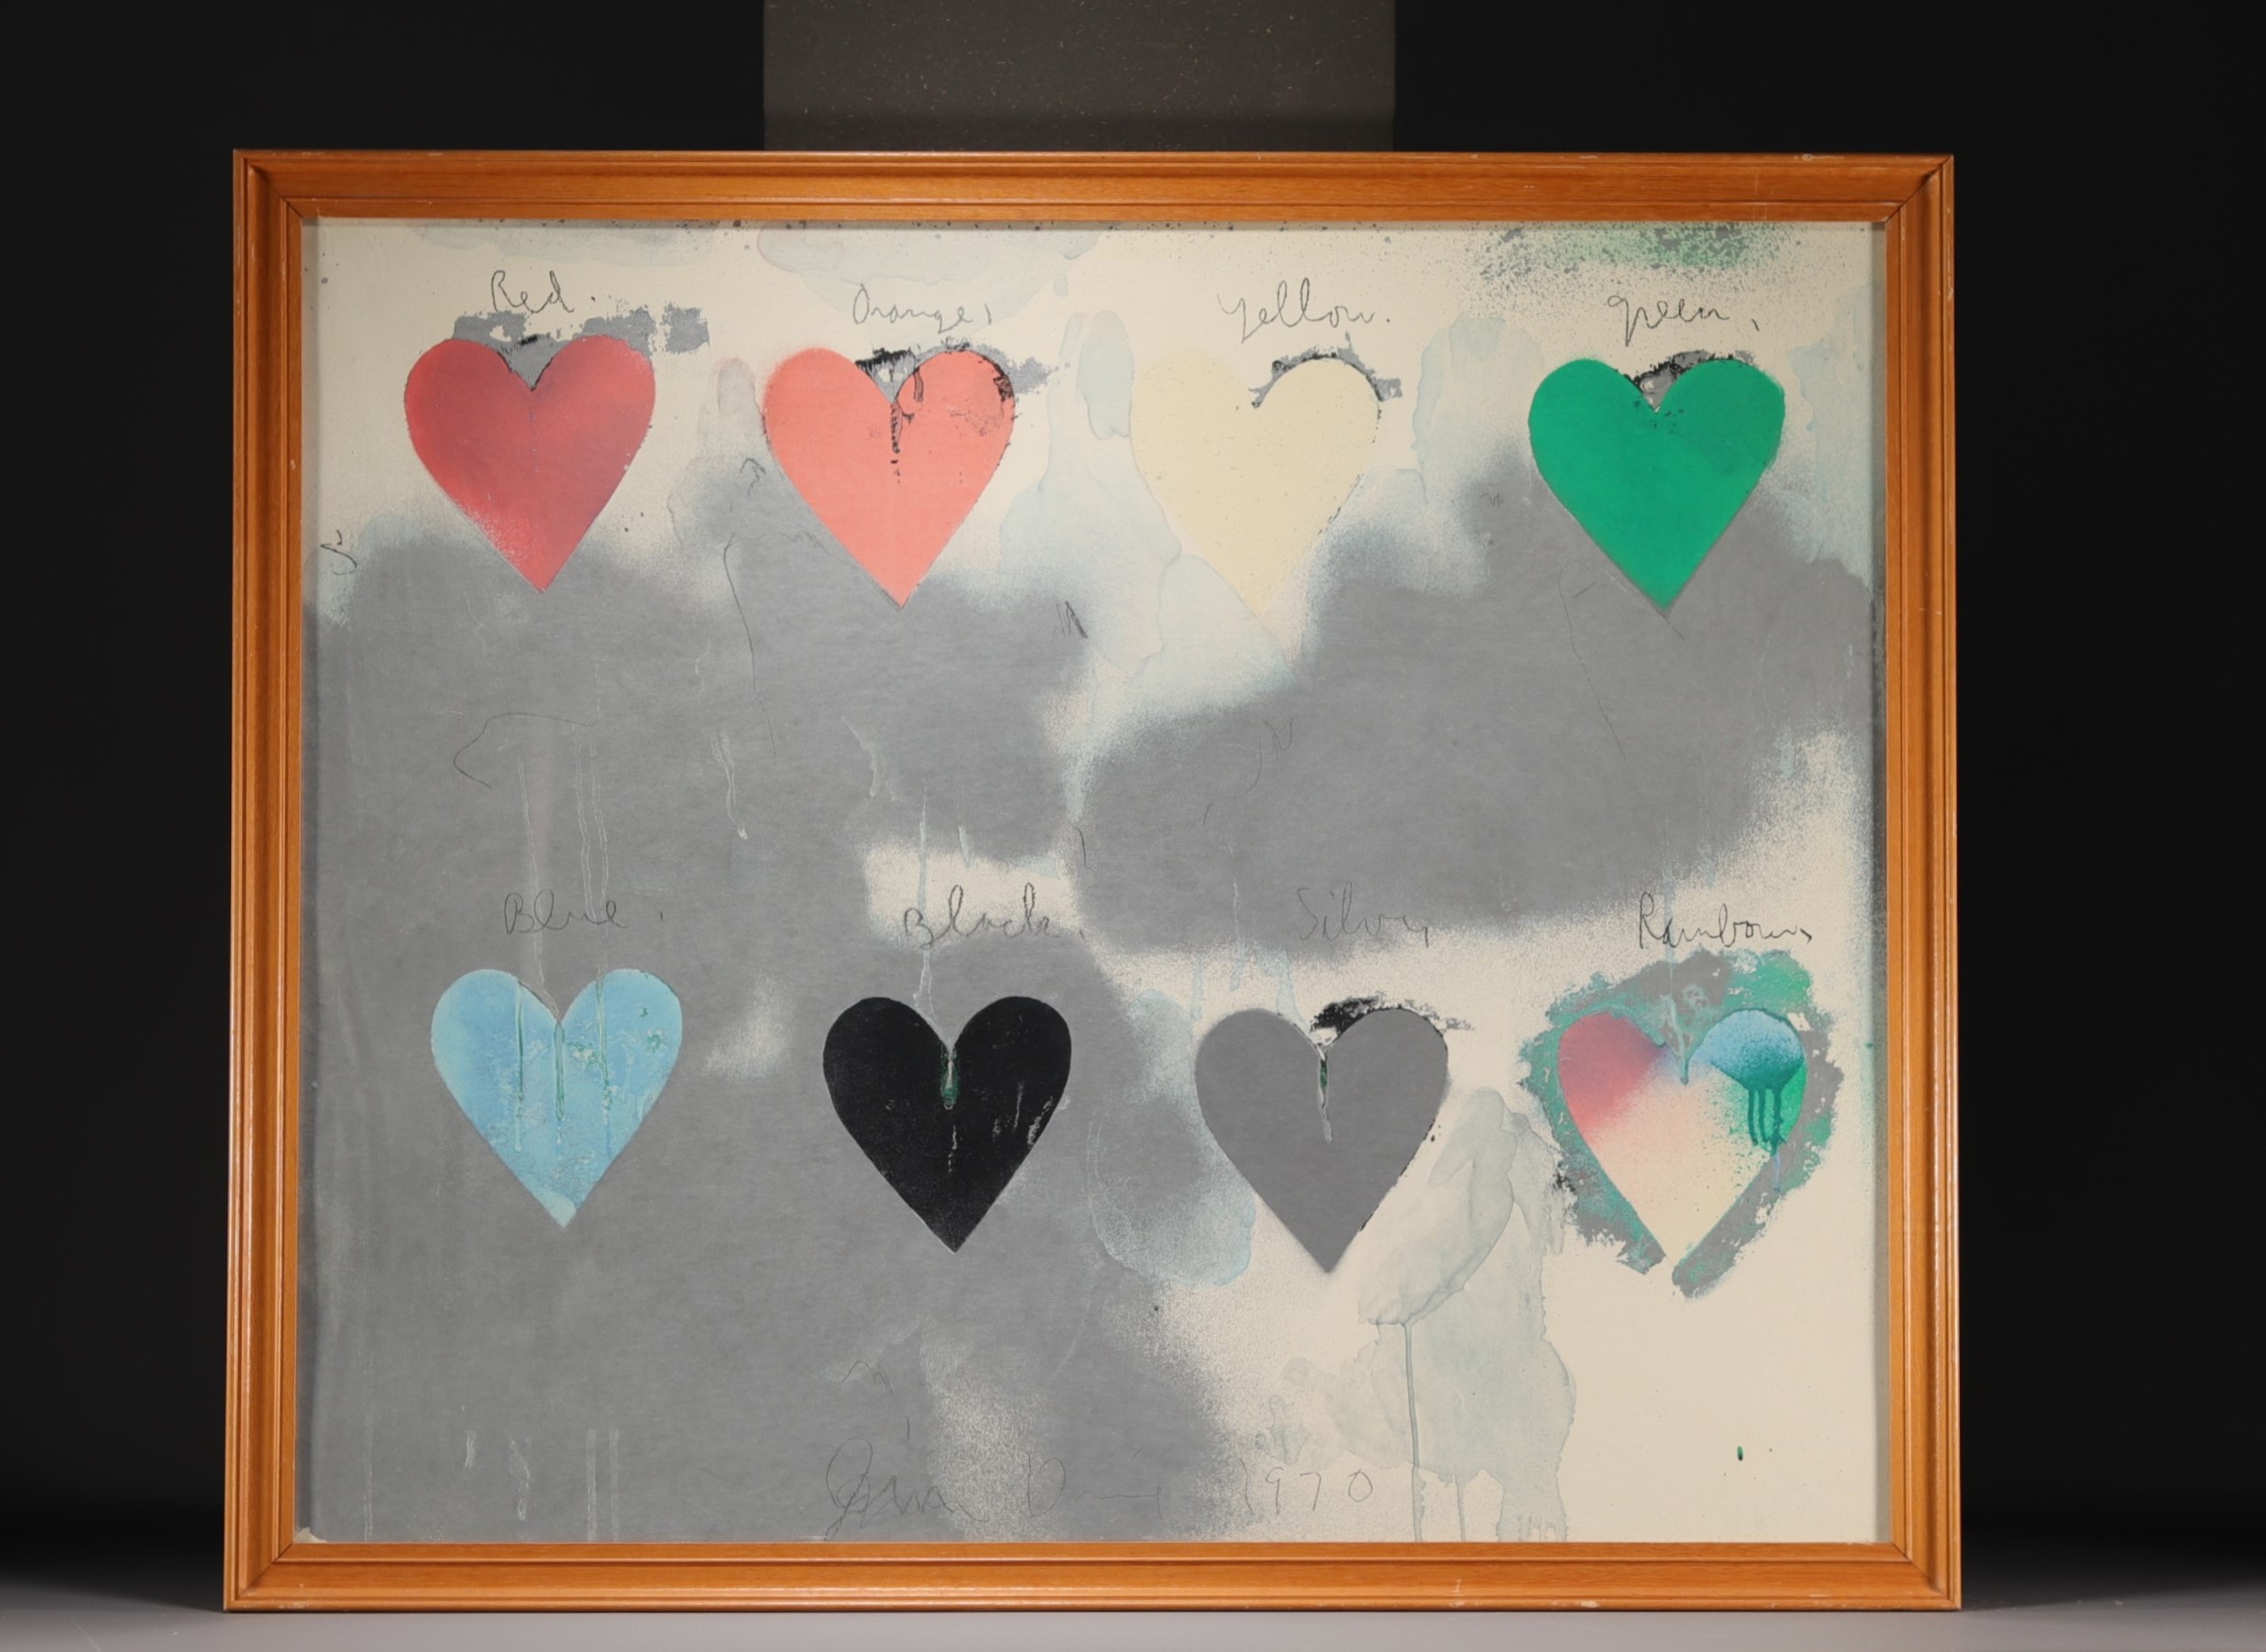 Jim DINE (1935- ) "8 Hearts" Print on paper, 1970. - Image 2 of 2